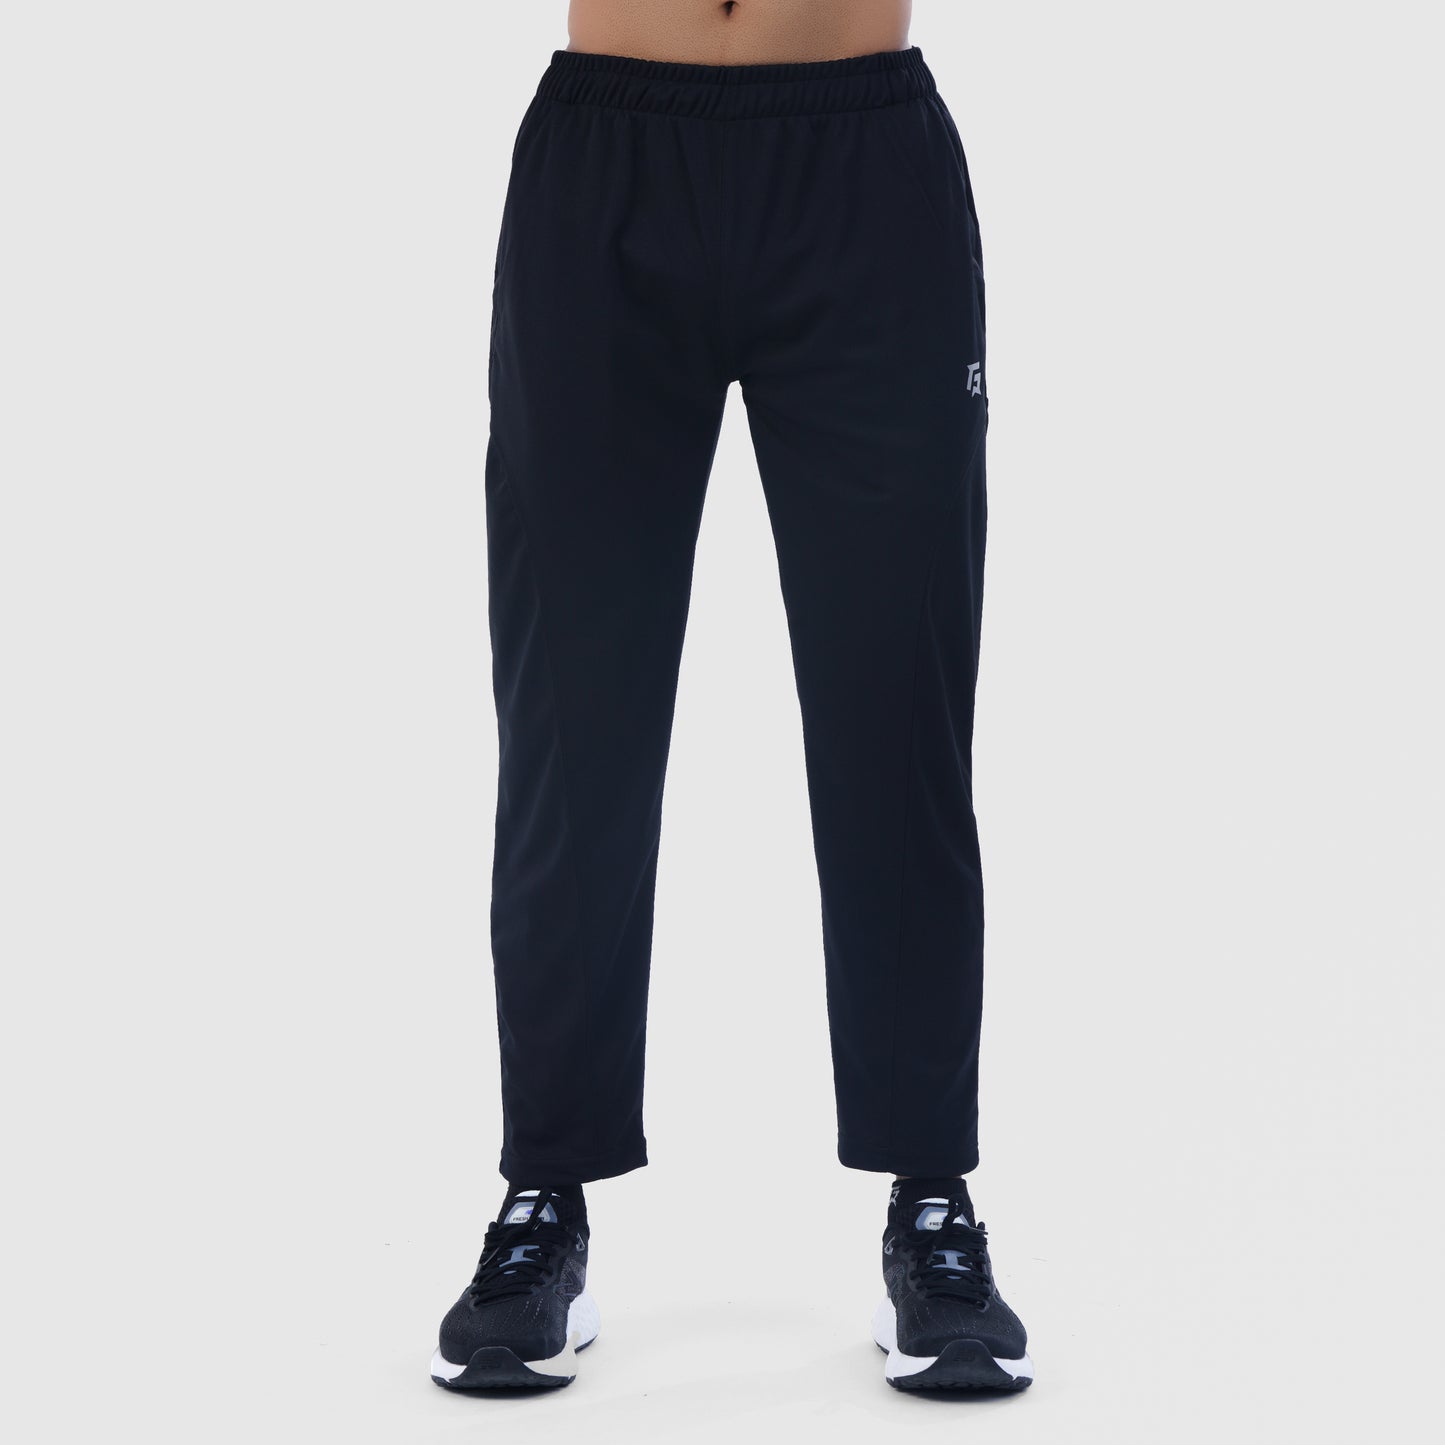 Voyager Trousers (Black)